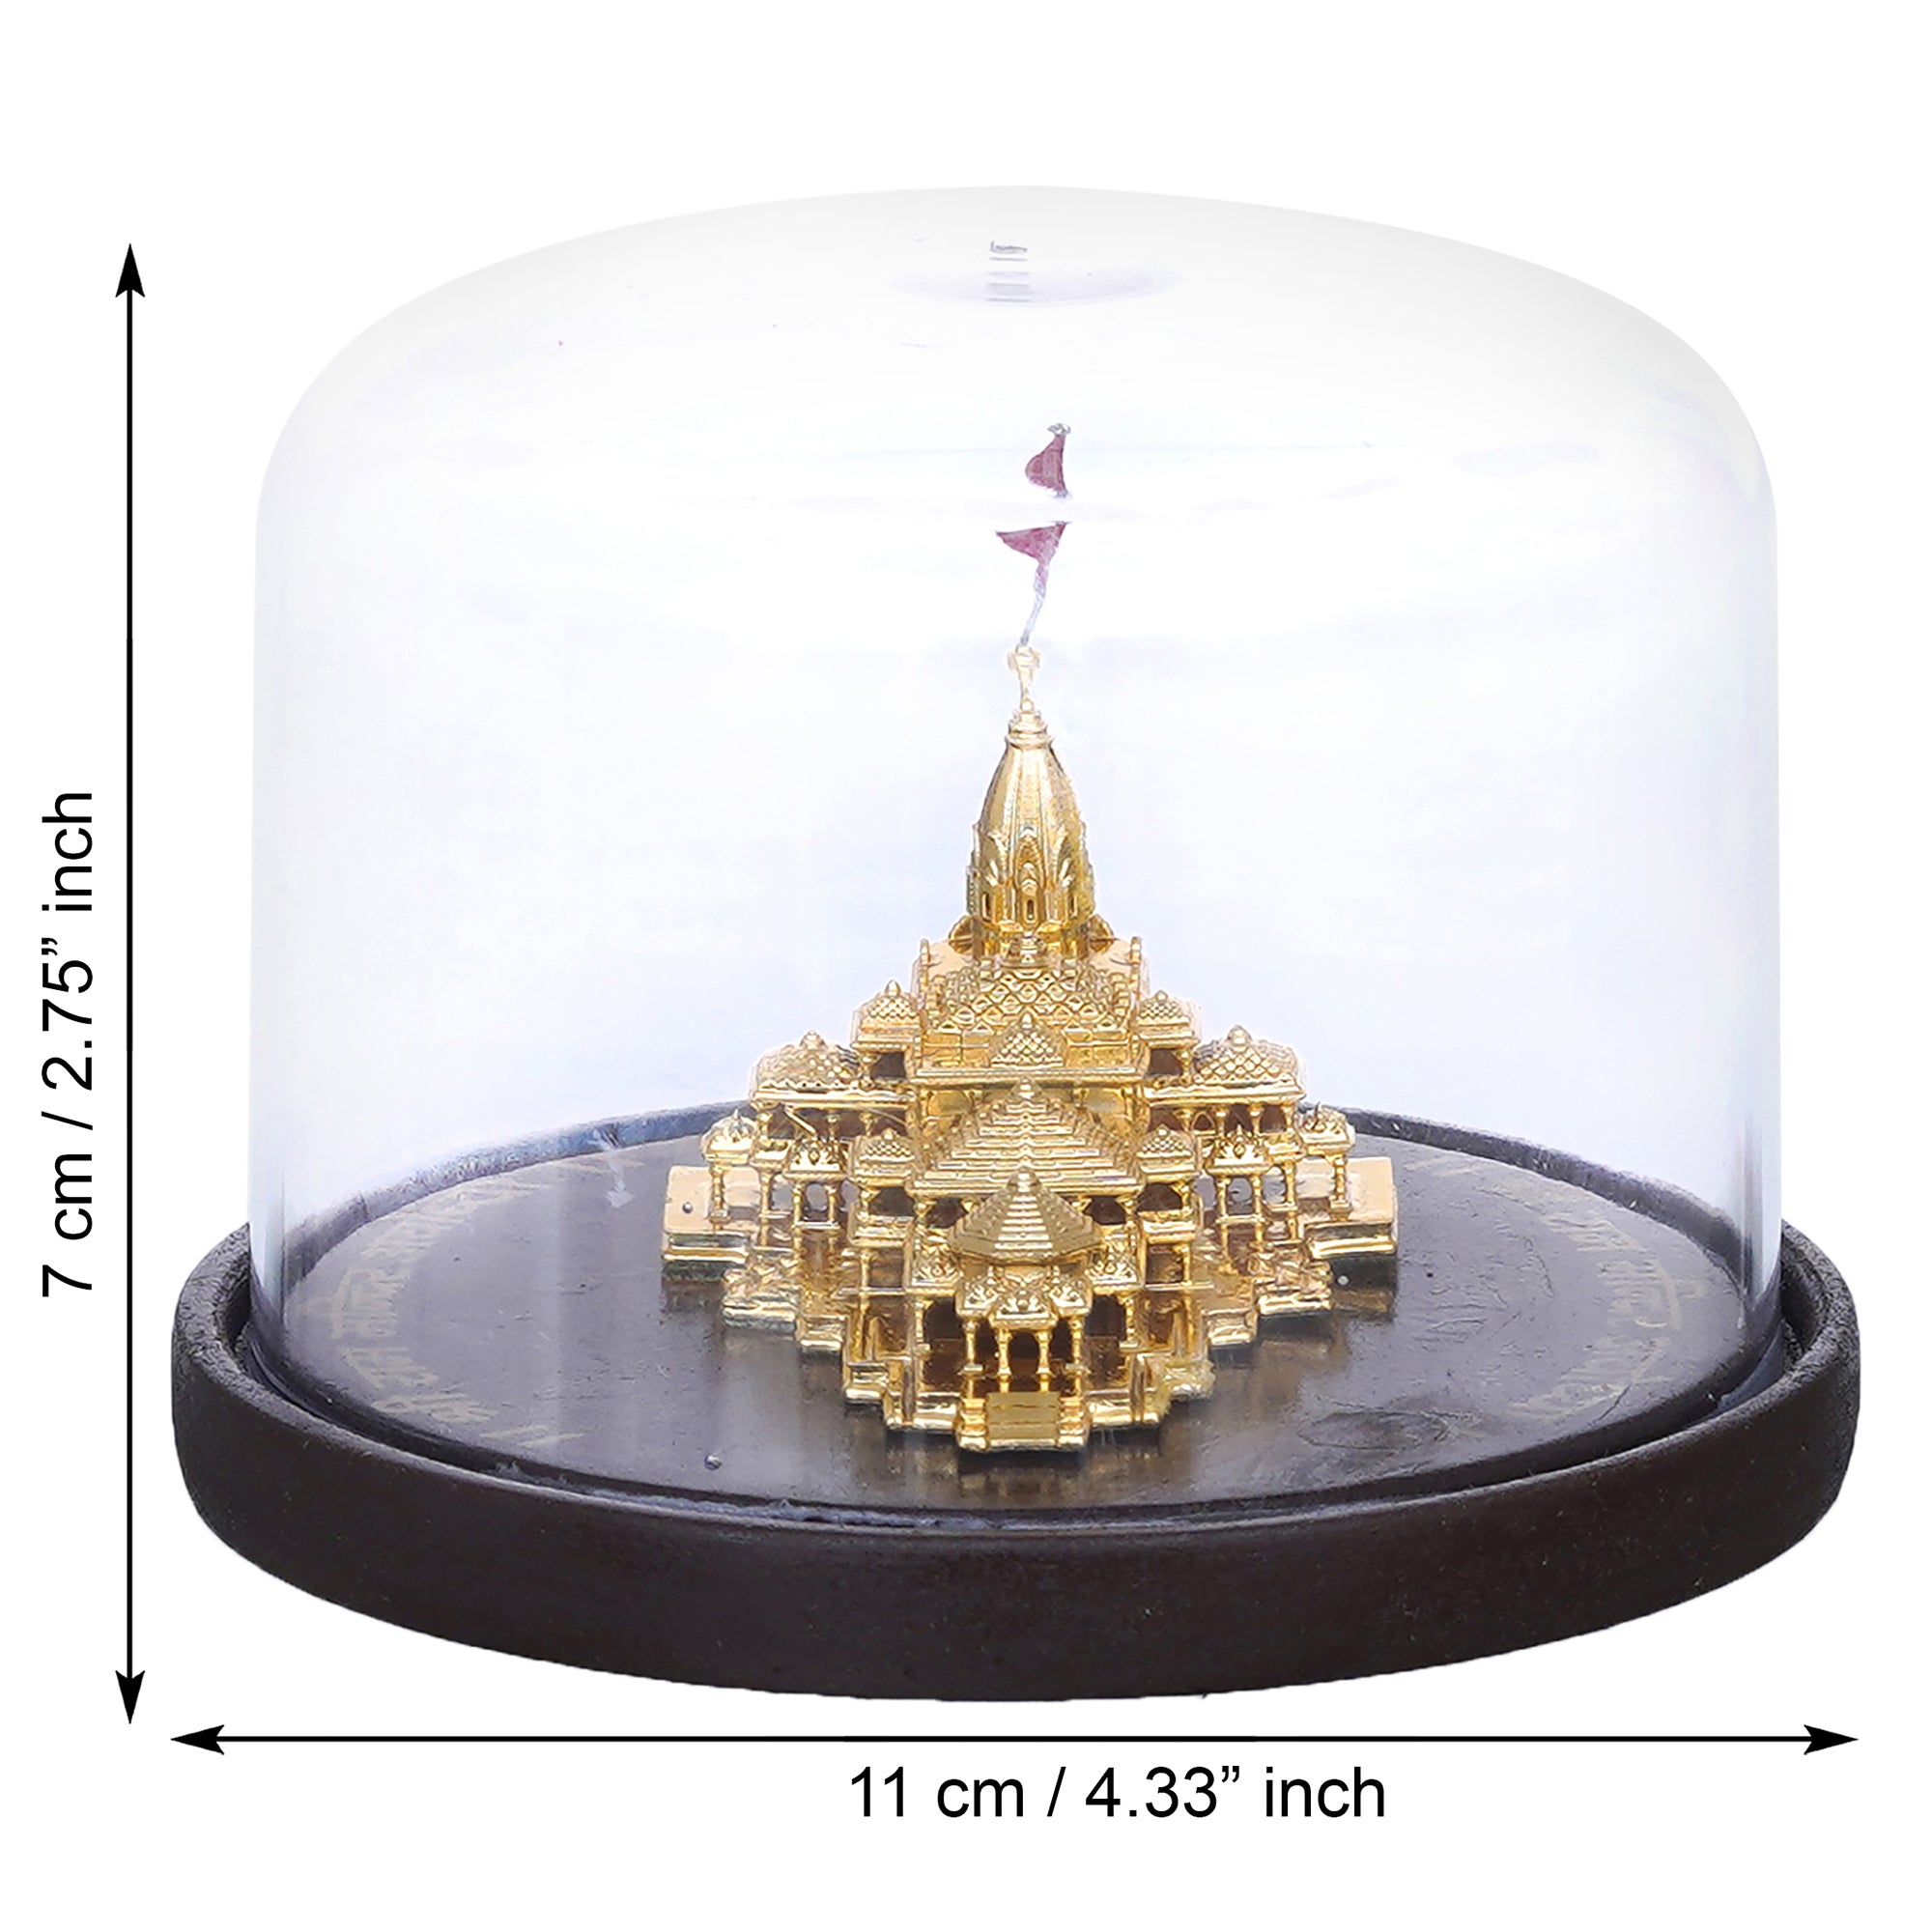 eCraftIndia Golden Shri Ram Mandir Ayodhya Model Authentic Designer Temple Covered by a Glass Dome - Perfect for Home Decor, and Spiritual Gifting 3